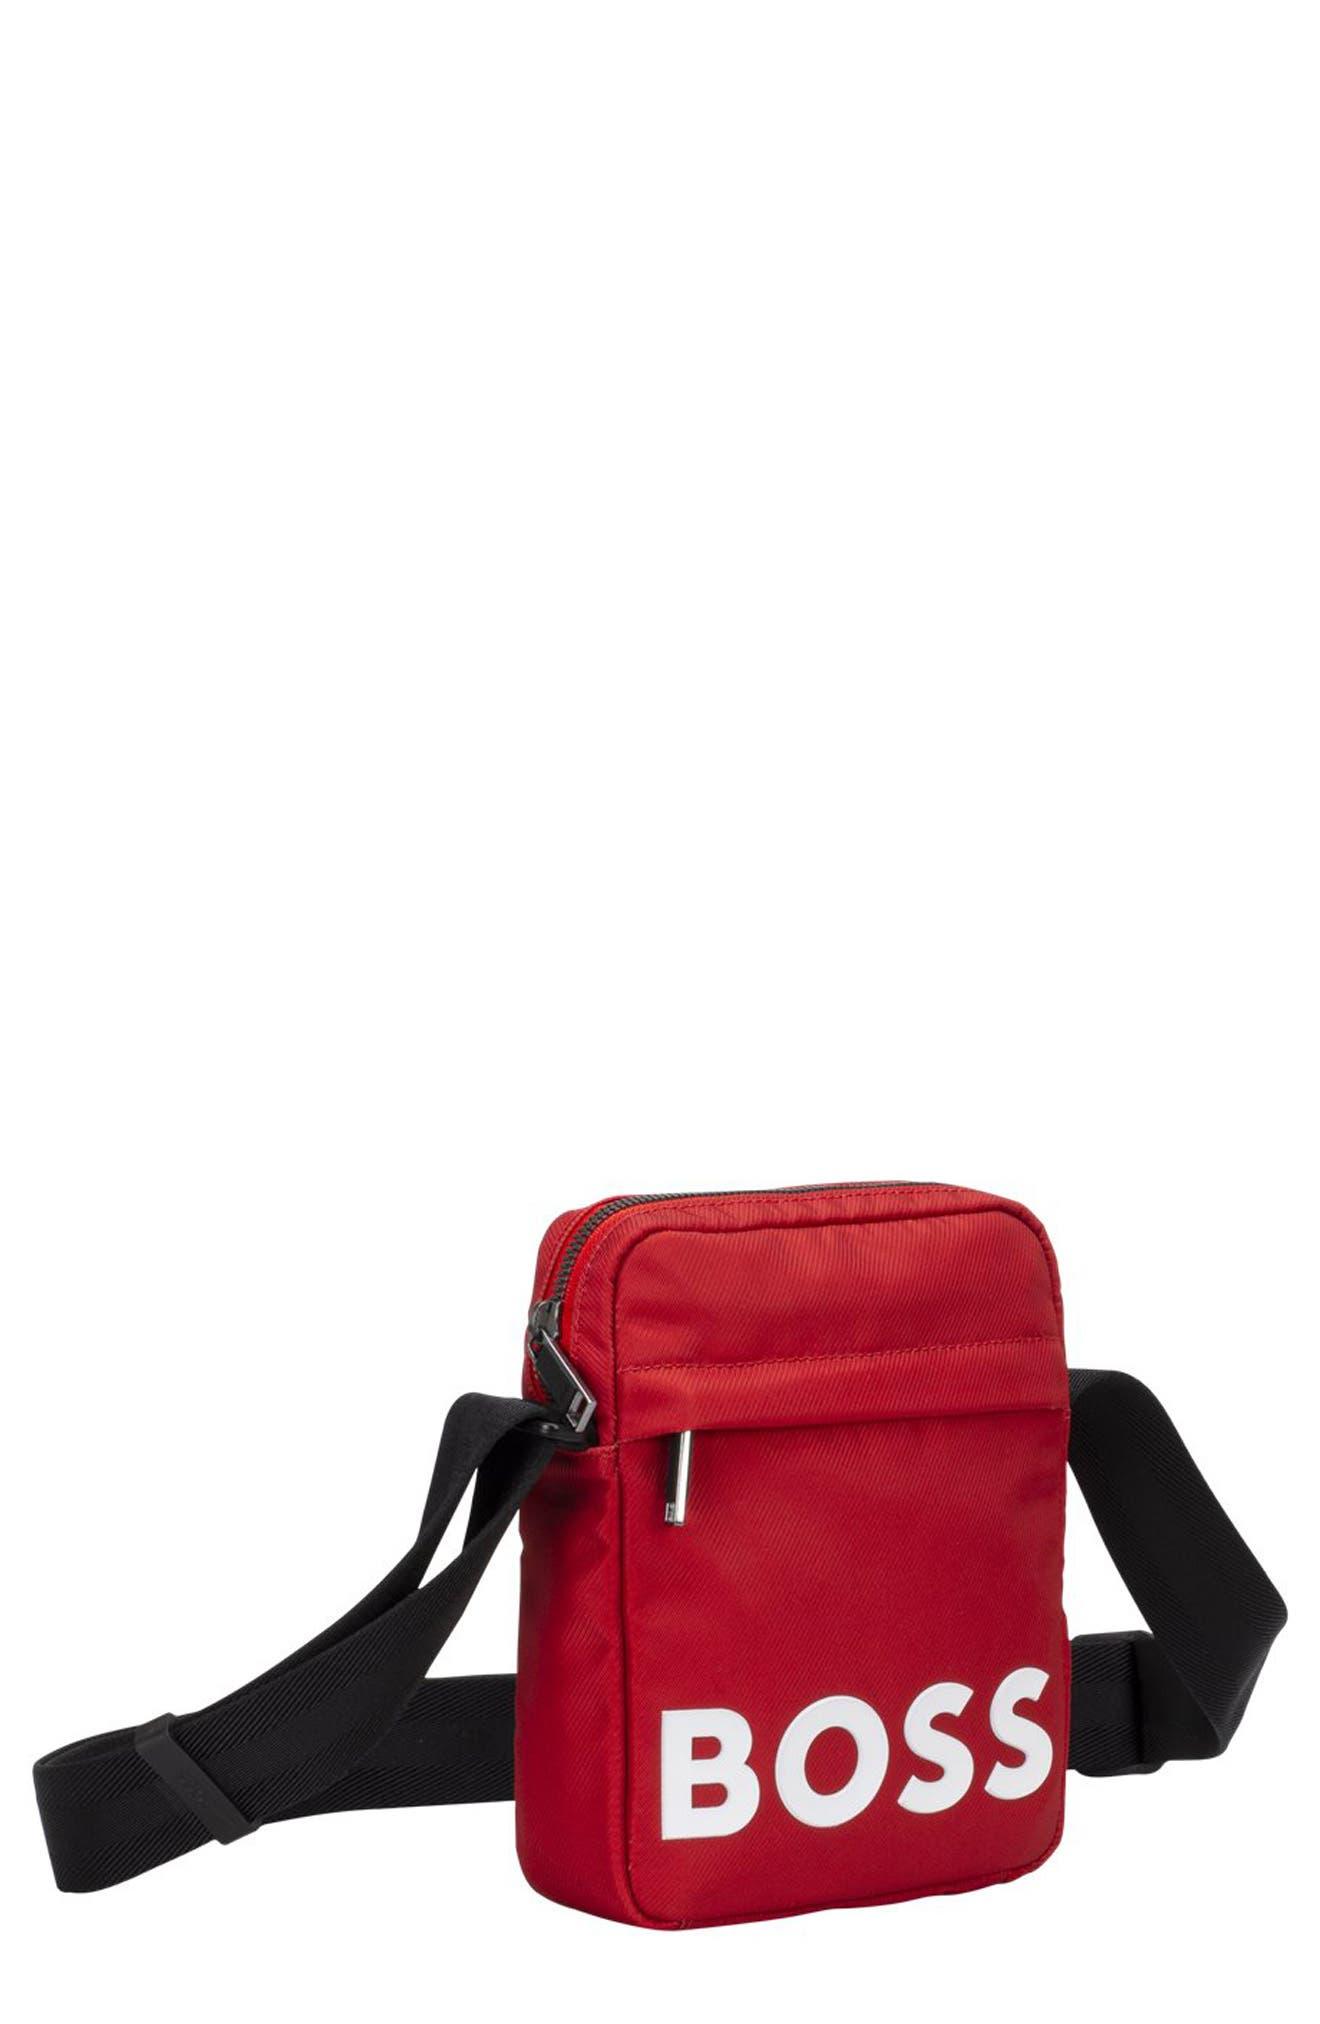 BOSS by HUGO BOSS Catch 2.0 Compact Messenger Bag in Red for Men | Lyst